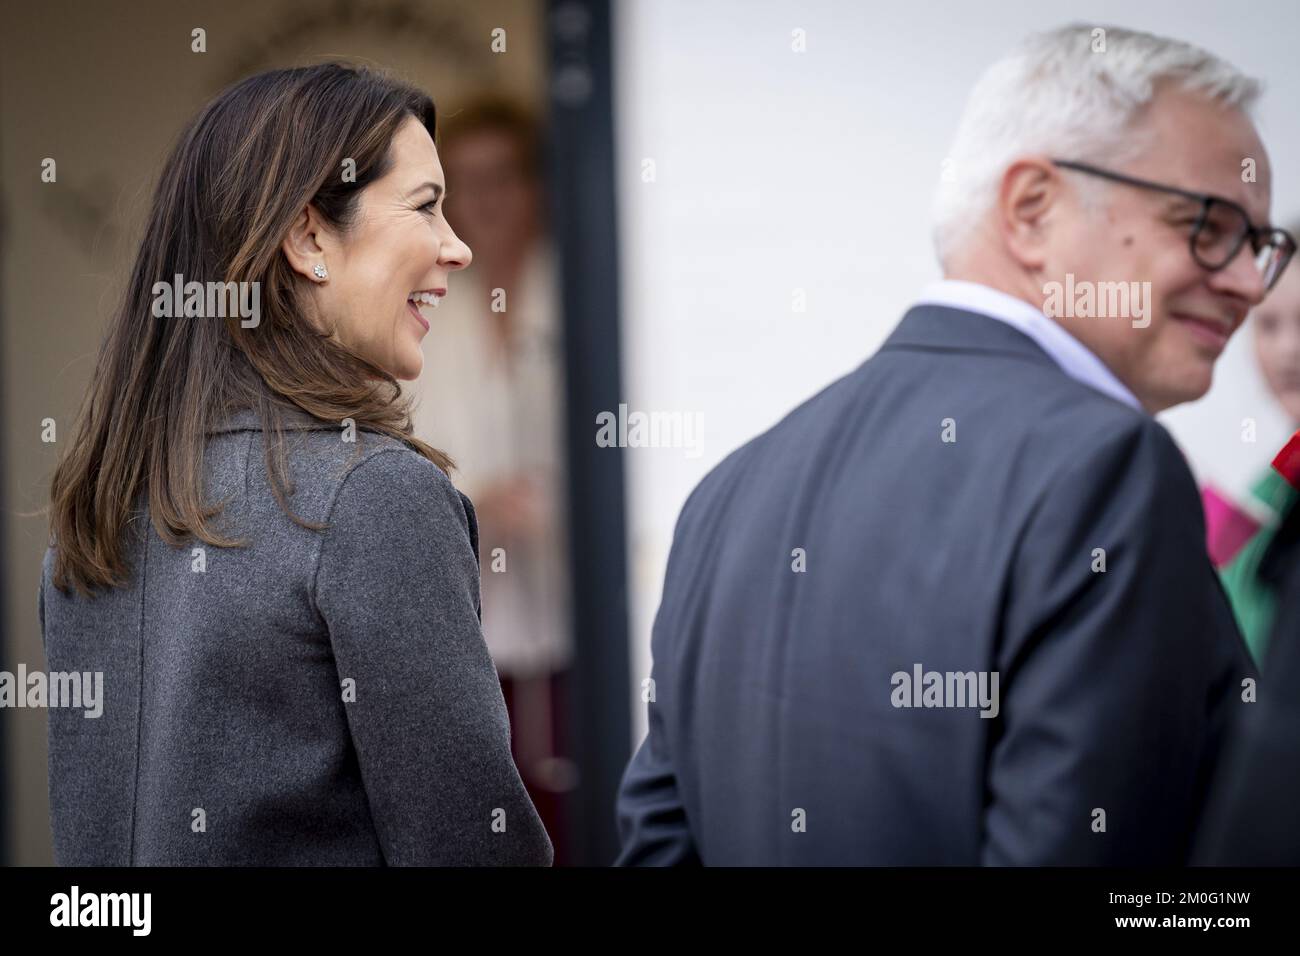 Crown Princess Mary at the 2020 Christmas Seal reveal at Christmas Seal Home Liljeborg in Roskilde. The Christmas Seal is issued annually by The Christmas Seal Foundation to finance the activities of the Christmas Seal Homes for socially vulnerable children. The first Christmas Seal was issued in 1904. The foundation is a unique and well known charity and social institution in Denmark. This year's seal carries the title 'Christmas Together', which is both in recognition of the 100 year anniversary of Denmark's reunion with Southern Jutland, as well as a tribute to the community that Christmas Stock Photo